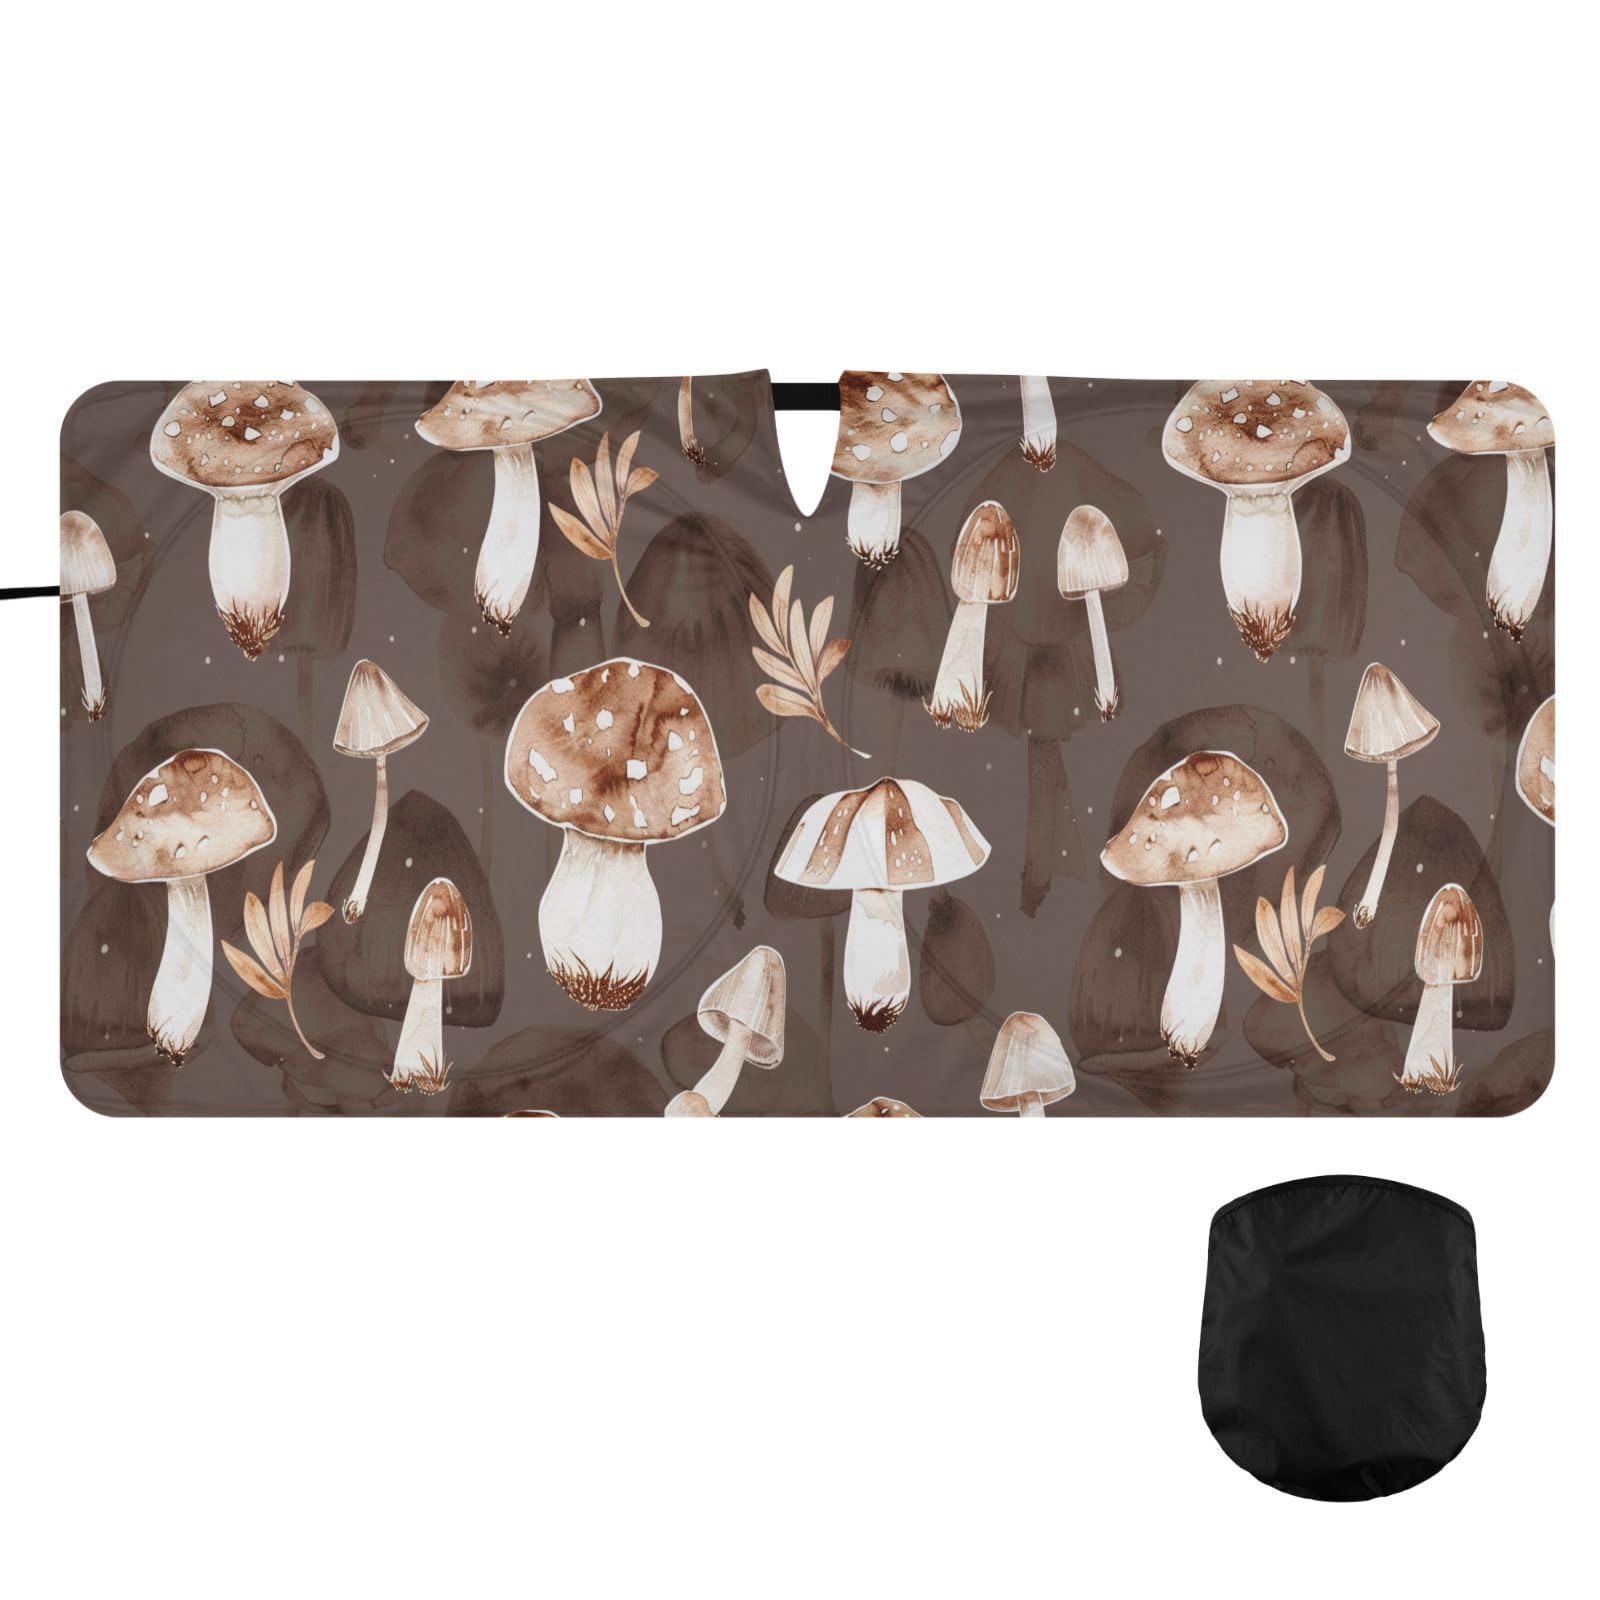 Oarencol Windshield Sun Shade Watercolor Mushrooms Retro Car Sunshade for Auto Truck SUV, Sun Shield That Keeps Your Vehicle Cool, Foldable, Storage Bag 62 x 32 Zoll von Oarencol